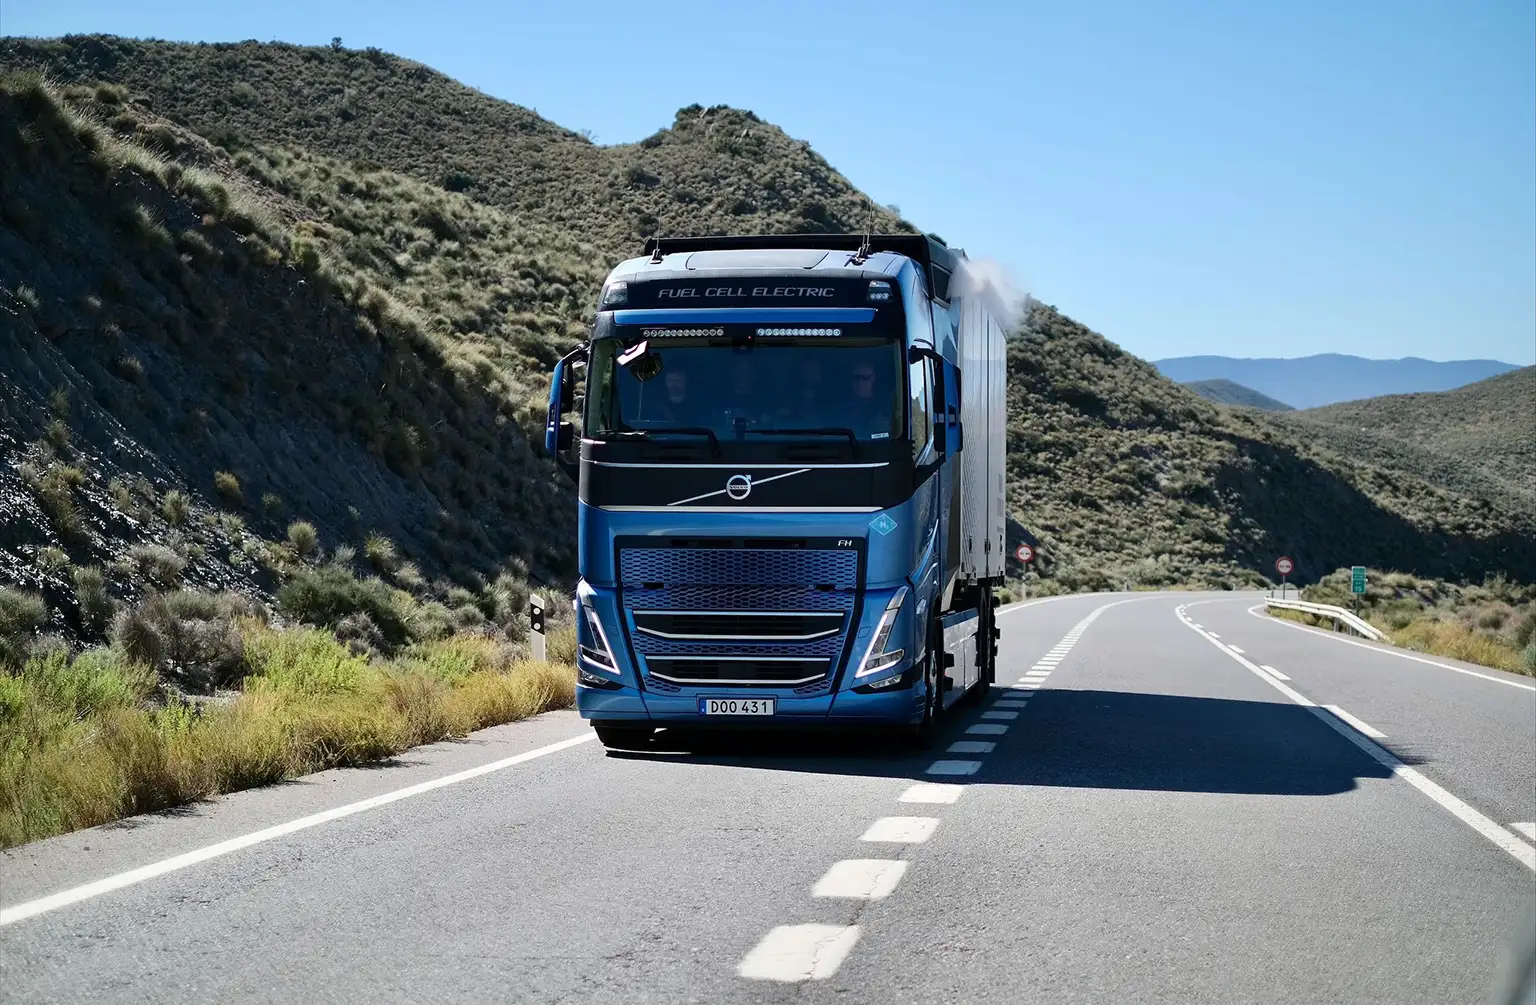 Volvo will launch trucks with combustion engines that can run on green hydrogen. These trucks provide a significant step to decarbonize heavy transport - 2